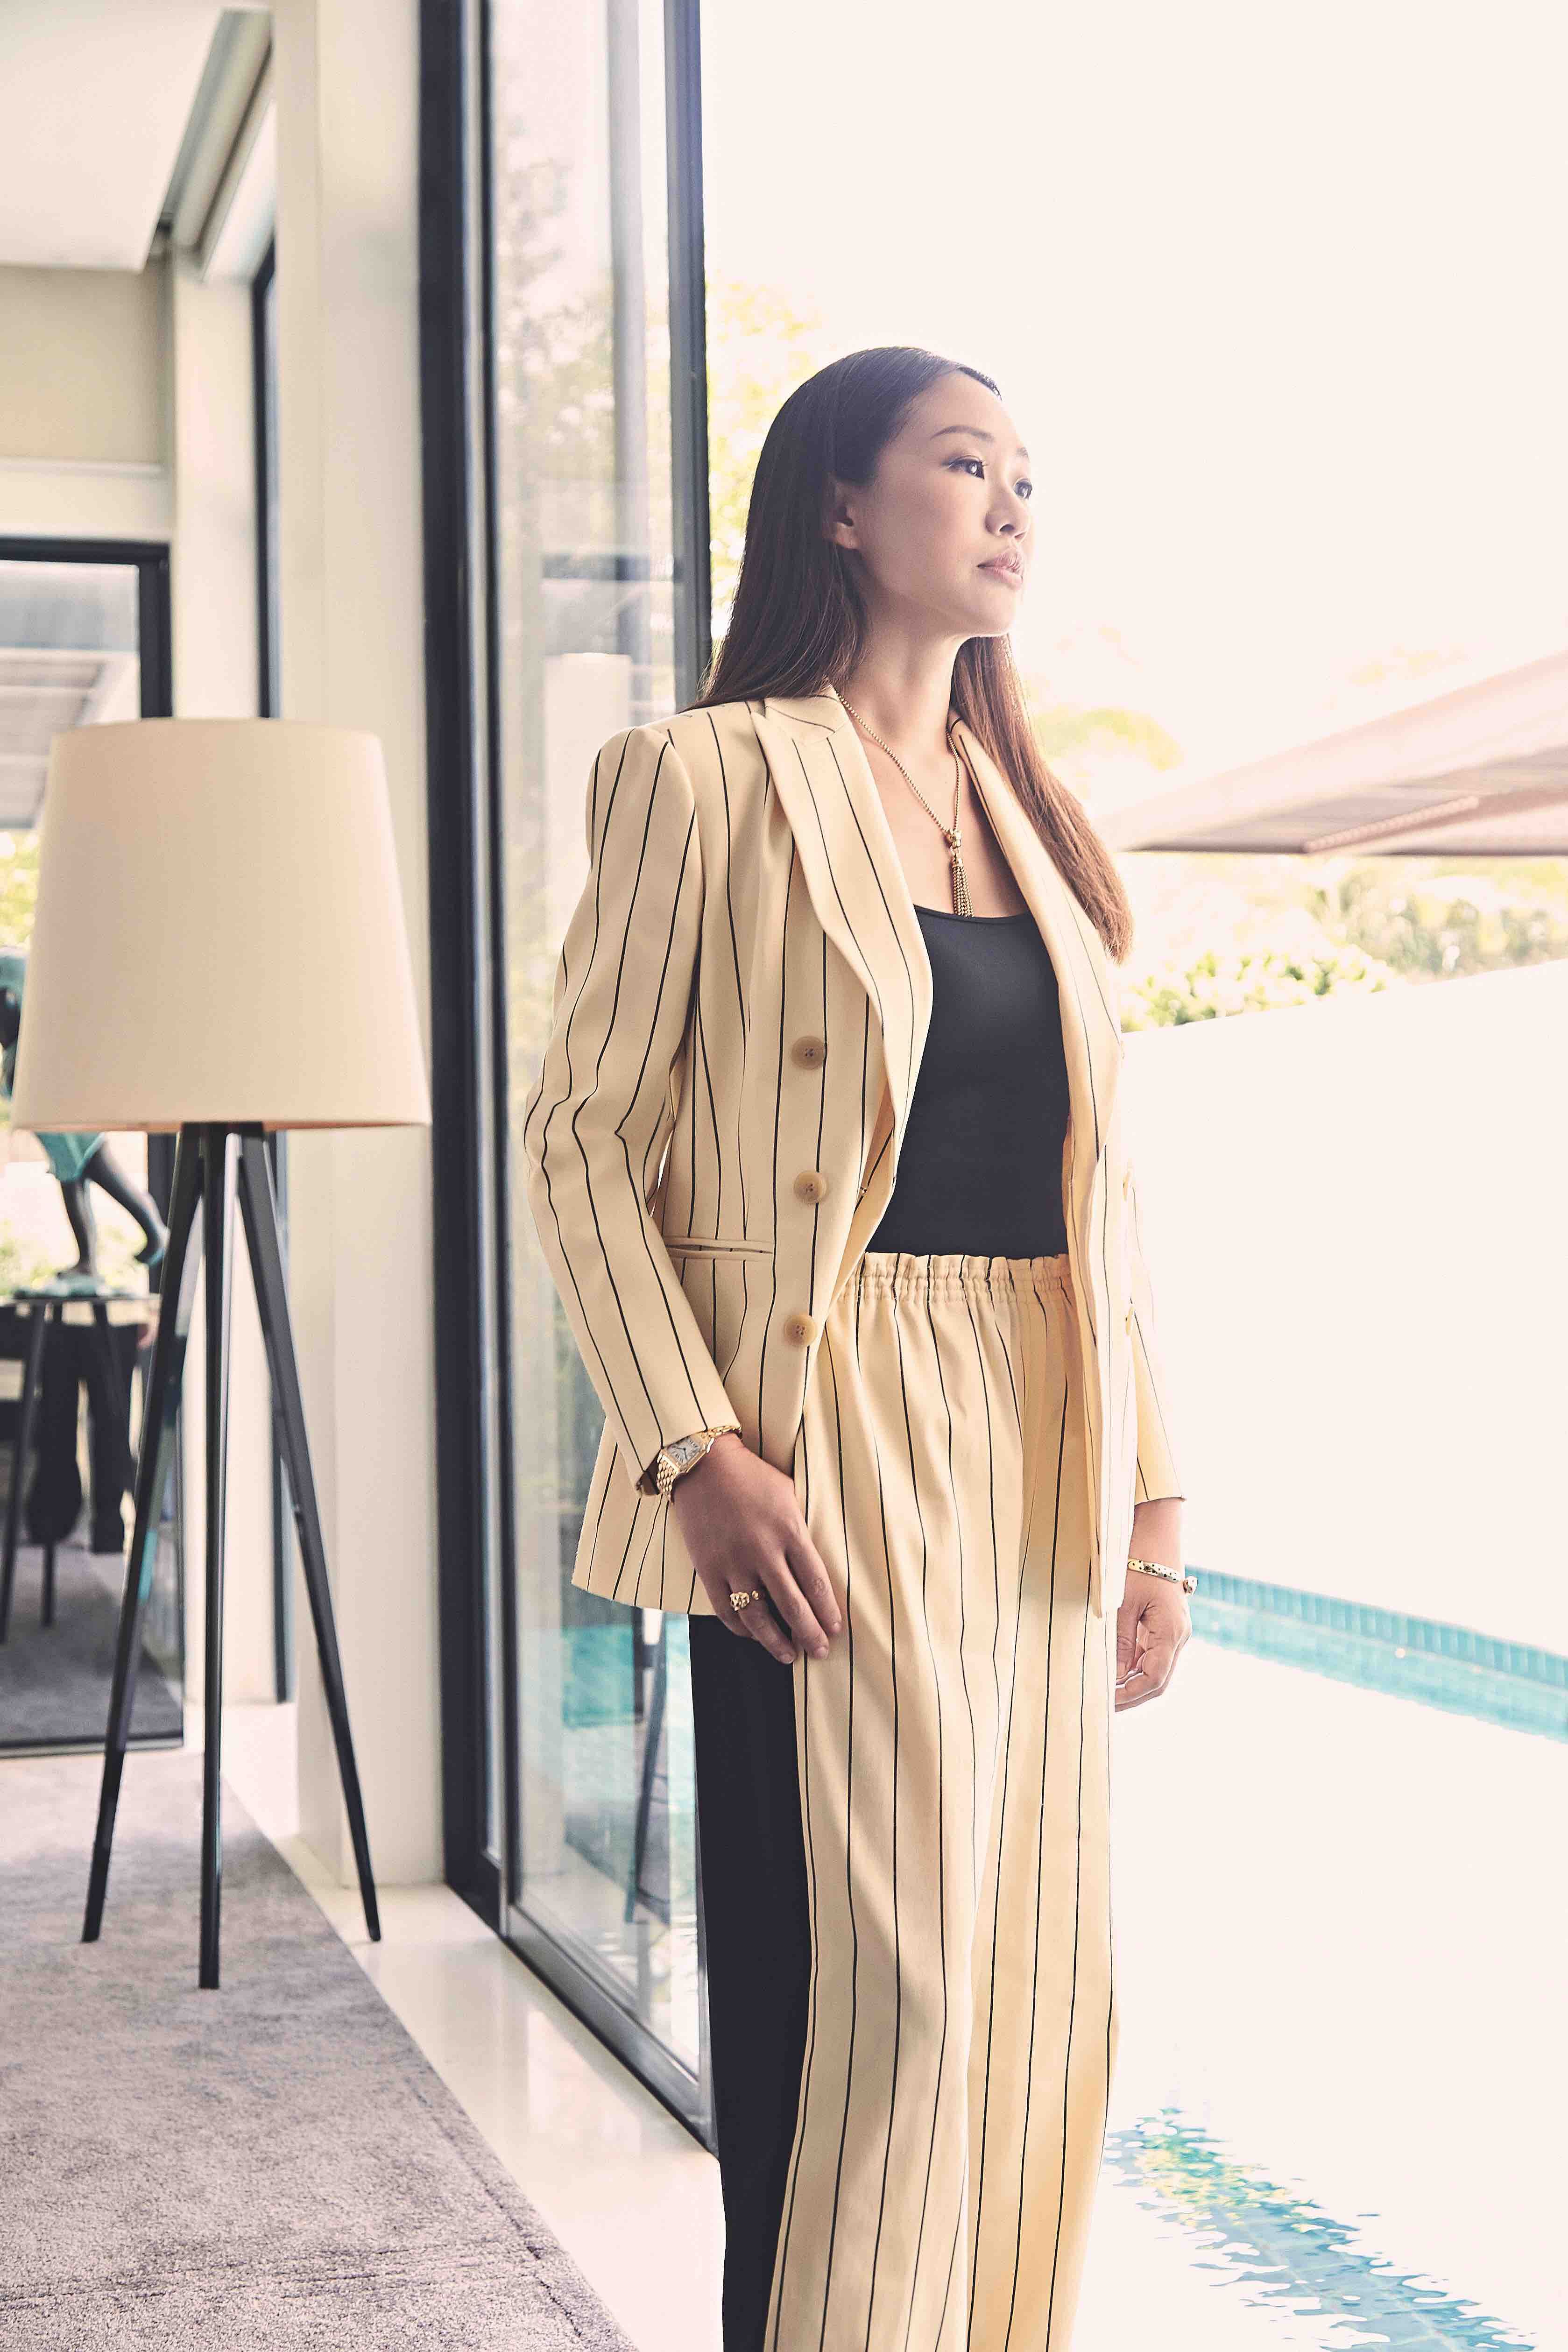 Sharon Sim is wearing a yellow striped cotton mixed pant suit, black leather loafer pumps from Tory Burch. All accessories and watches are from Cartier.